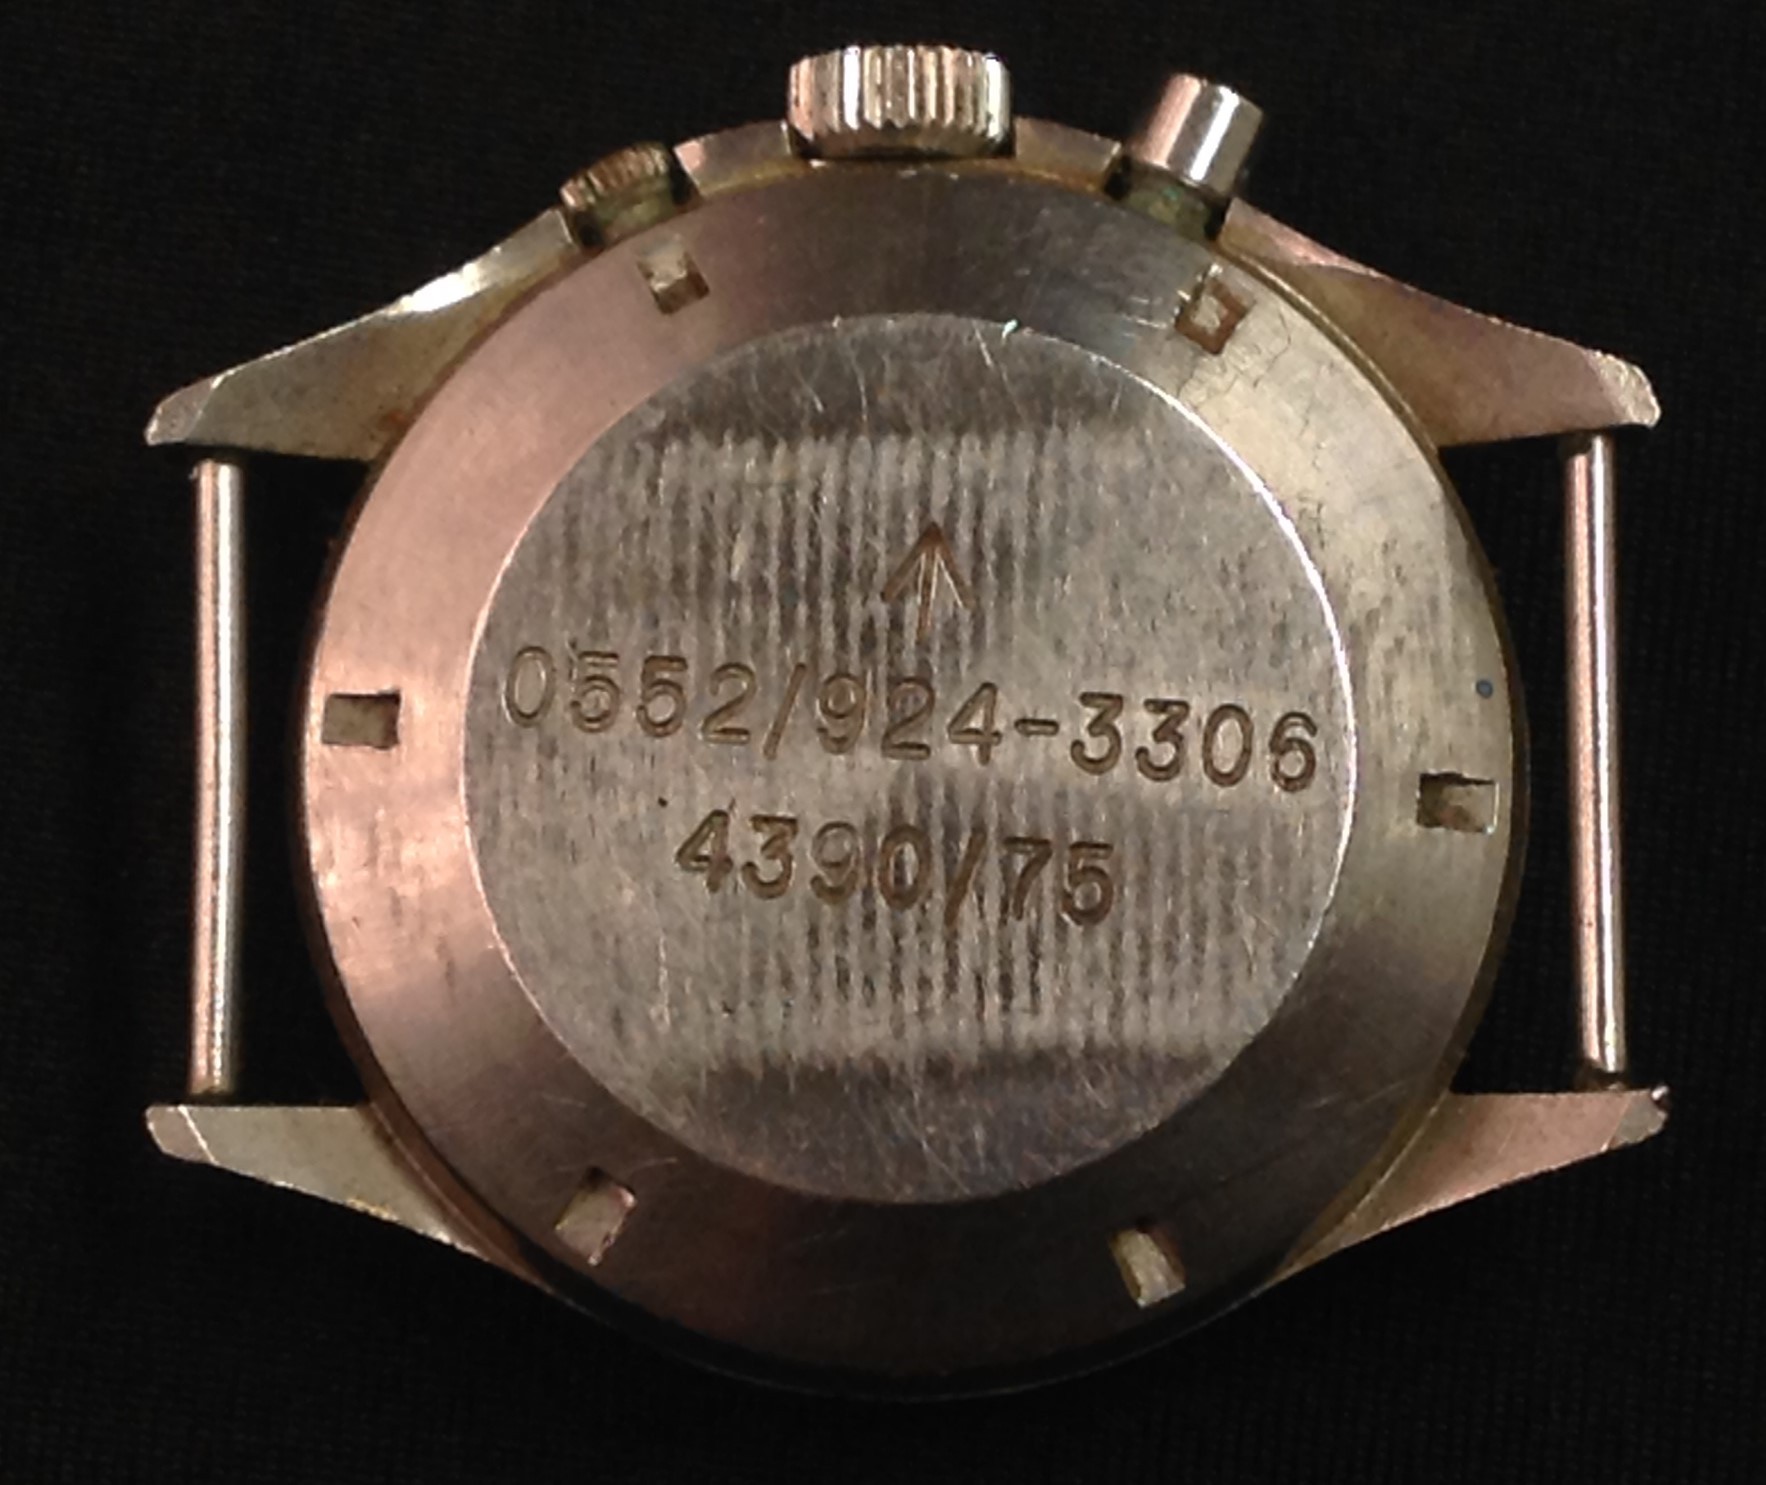 Post War 1970's British Military issue twin button Lemania Chronometer watch head, black dial, - Image 3 of 3